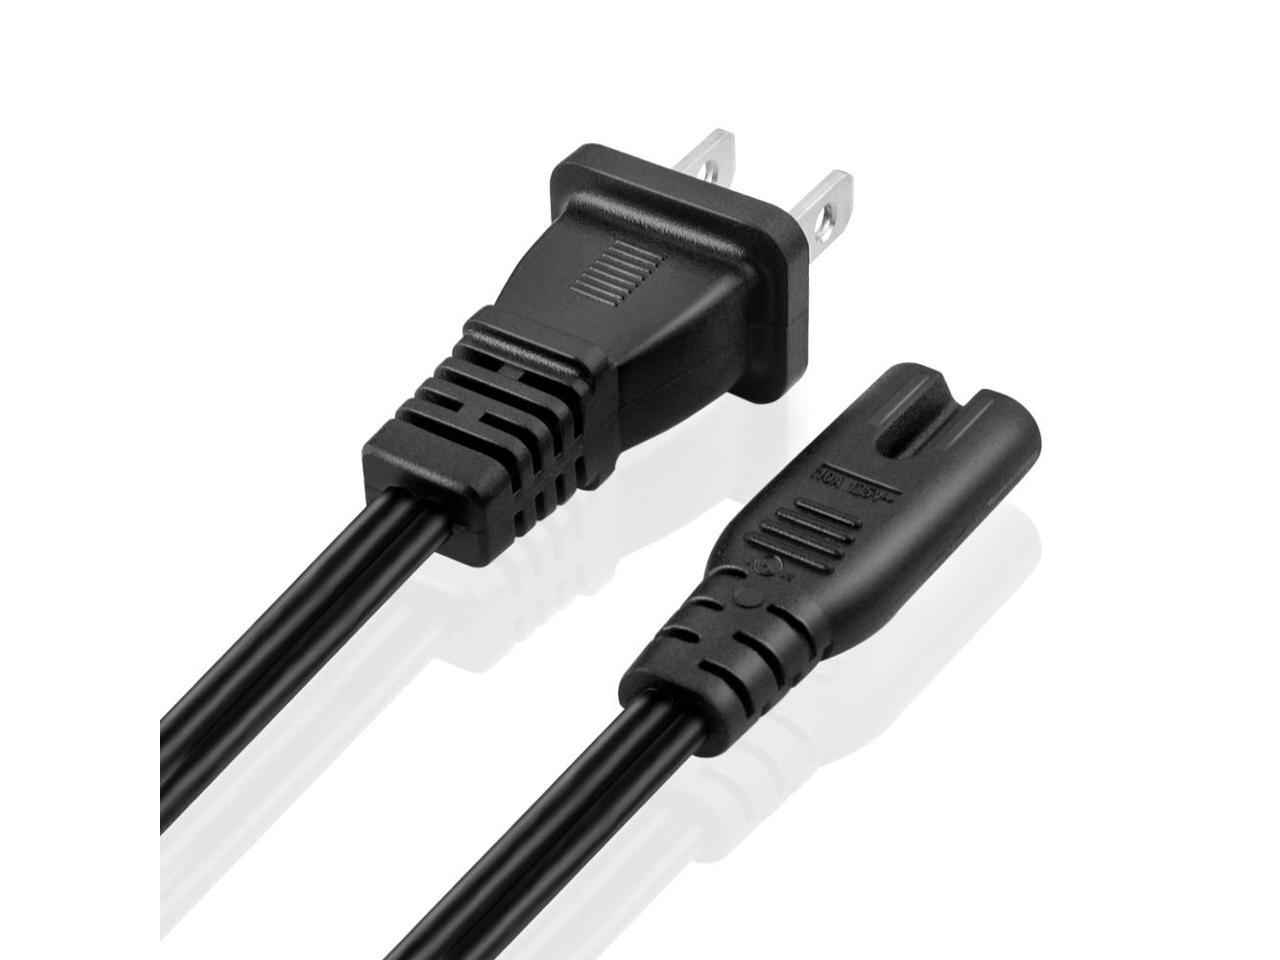 Compatible w/Apple TV PS4 PS3 Slim LED HDT TNP Products TNP Universal 2 Prong Angled Power Cord 15 Feet - NEMA 1-15P to IEC320 C7 Figure 8 Shotgun Connector AC Power Supply Cable Wire Socket Plug Jack Black 